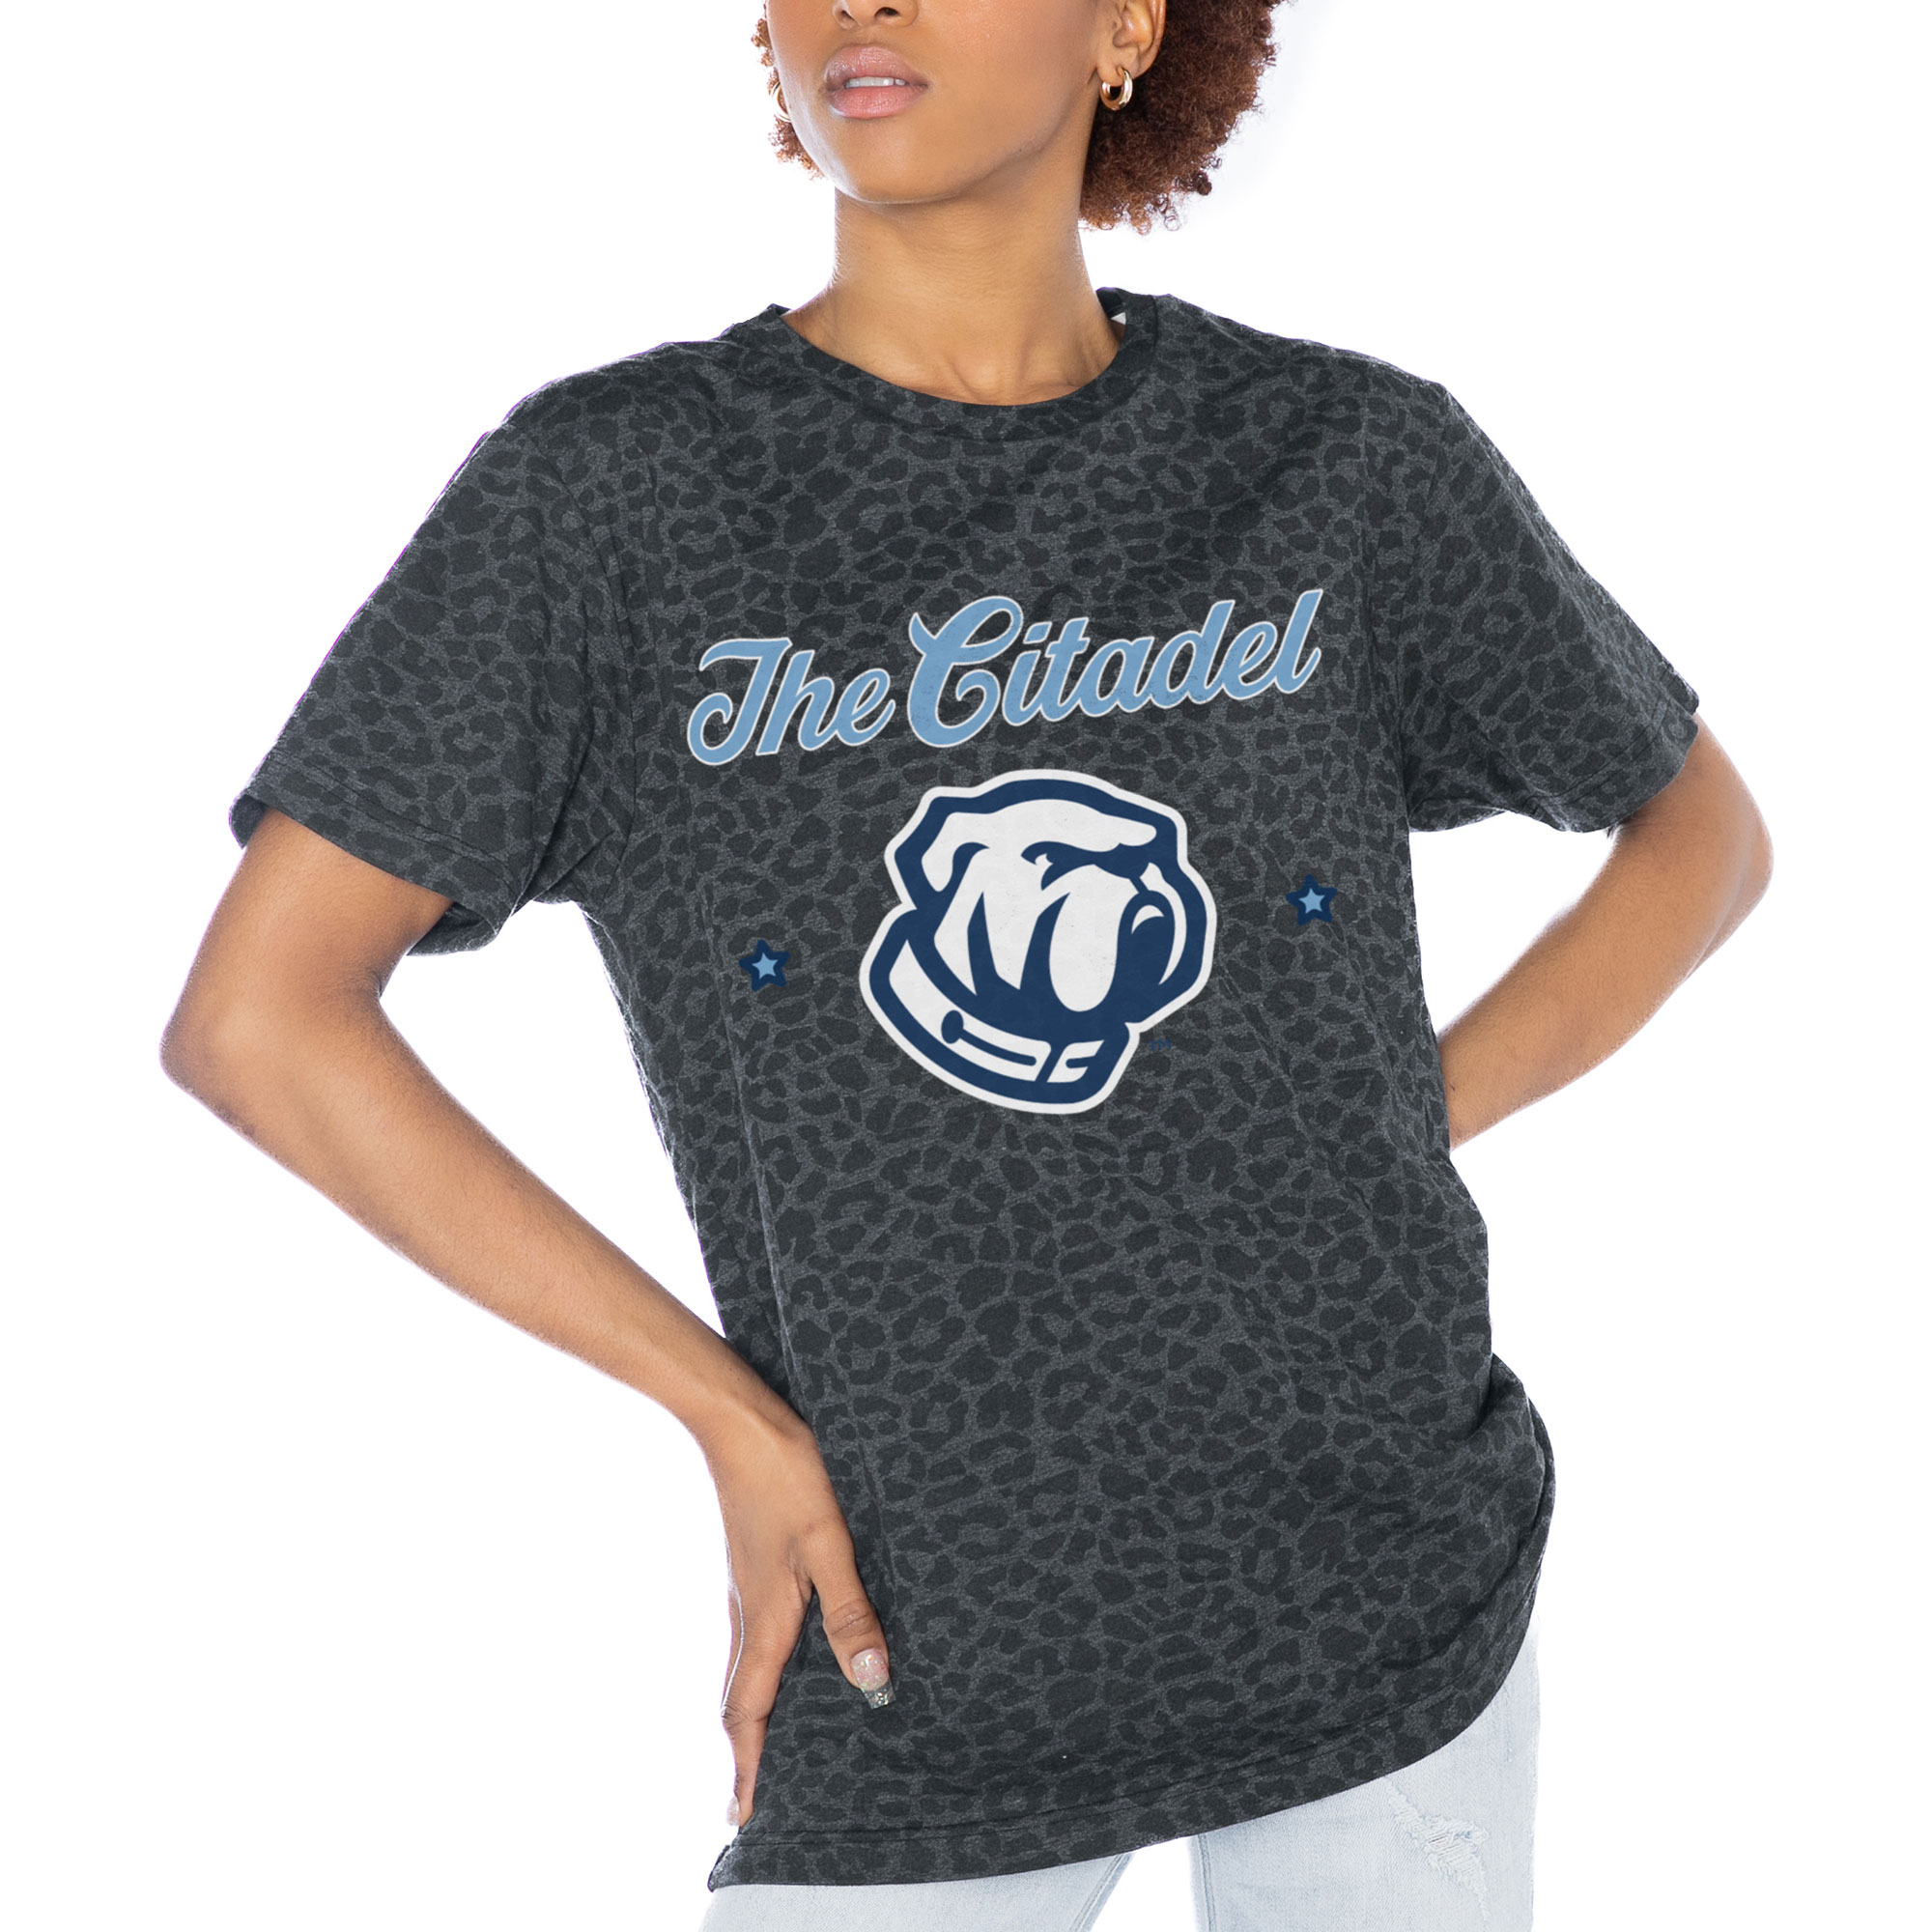 Women's Gameday Couture Charcoal Citadel Bulldogs Victory Lap Leopard Standard Fit T-Shirt - image 1 of 1